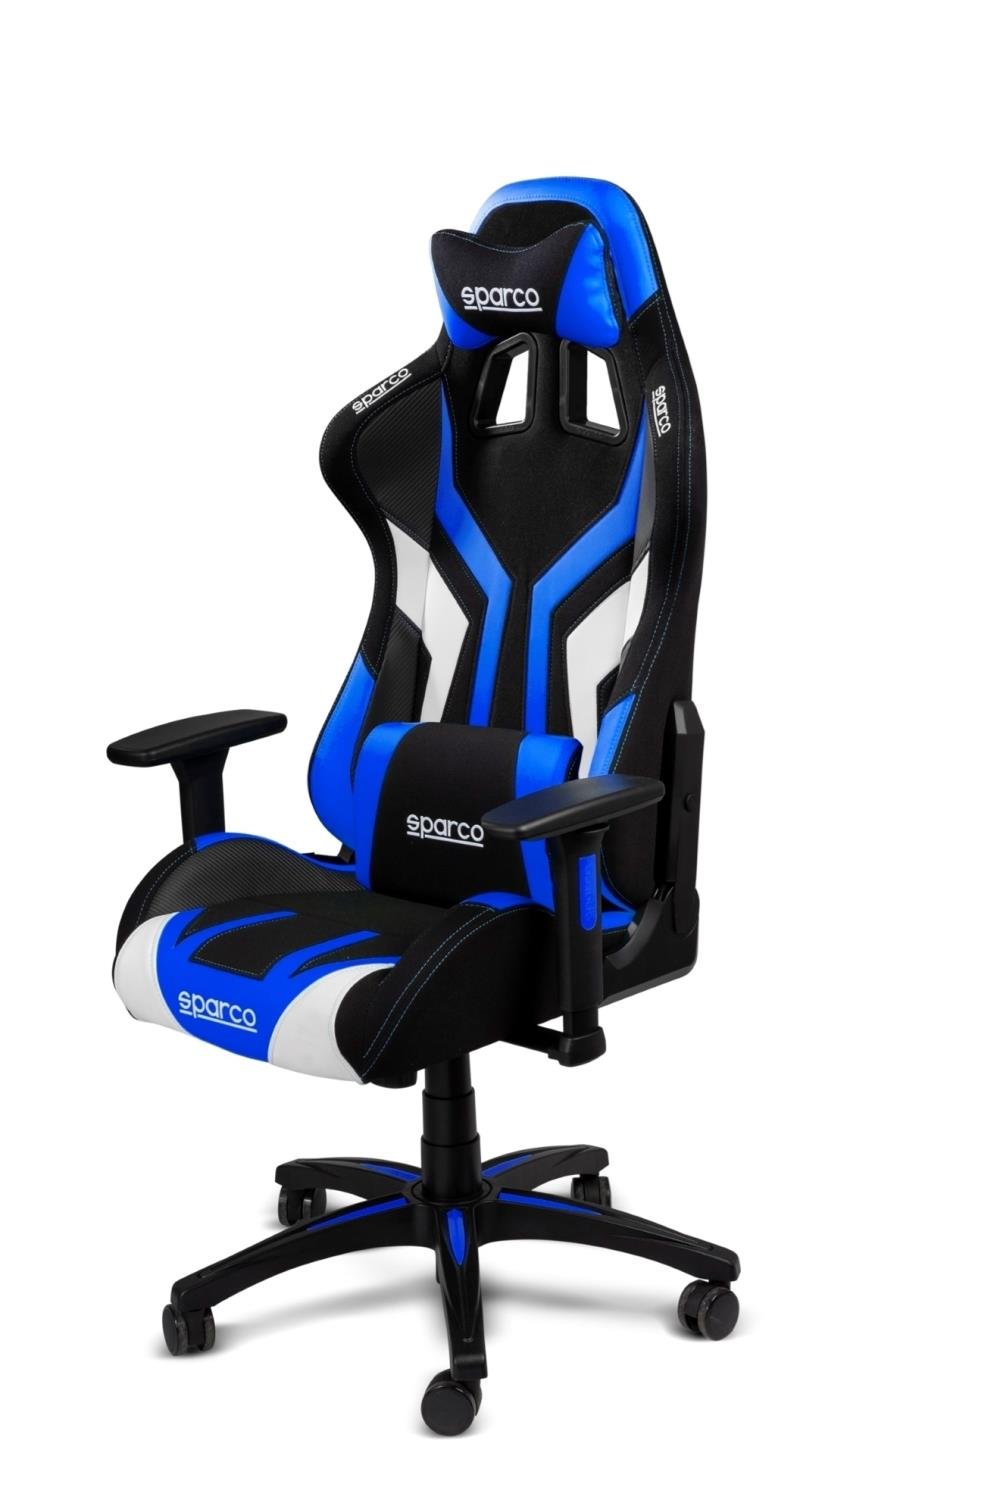 Sparco Torino Series Gaming Chair